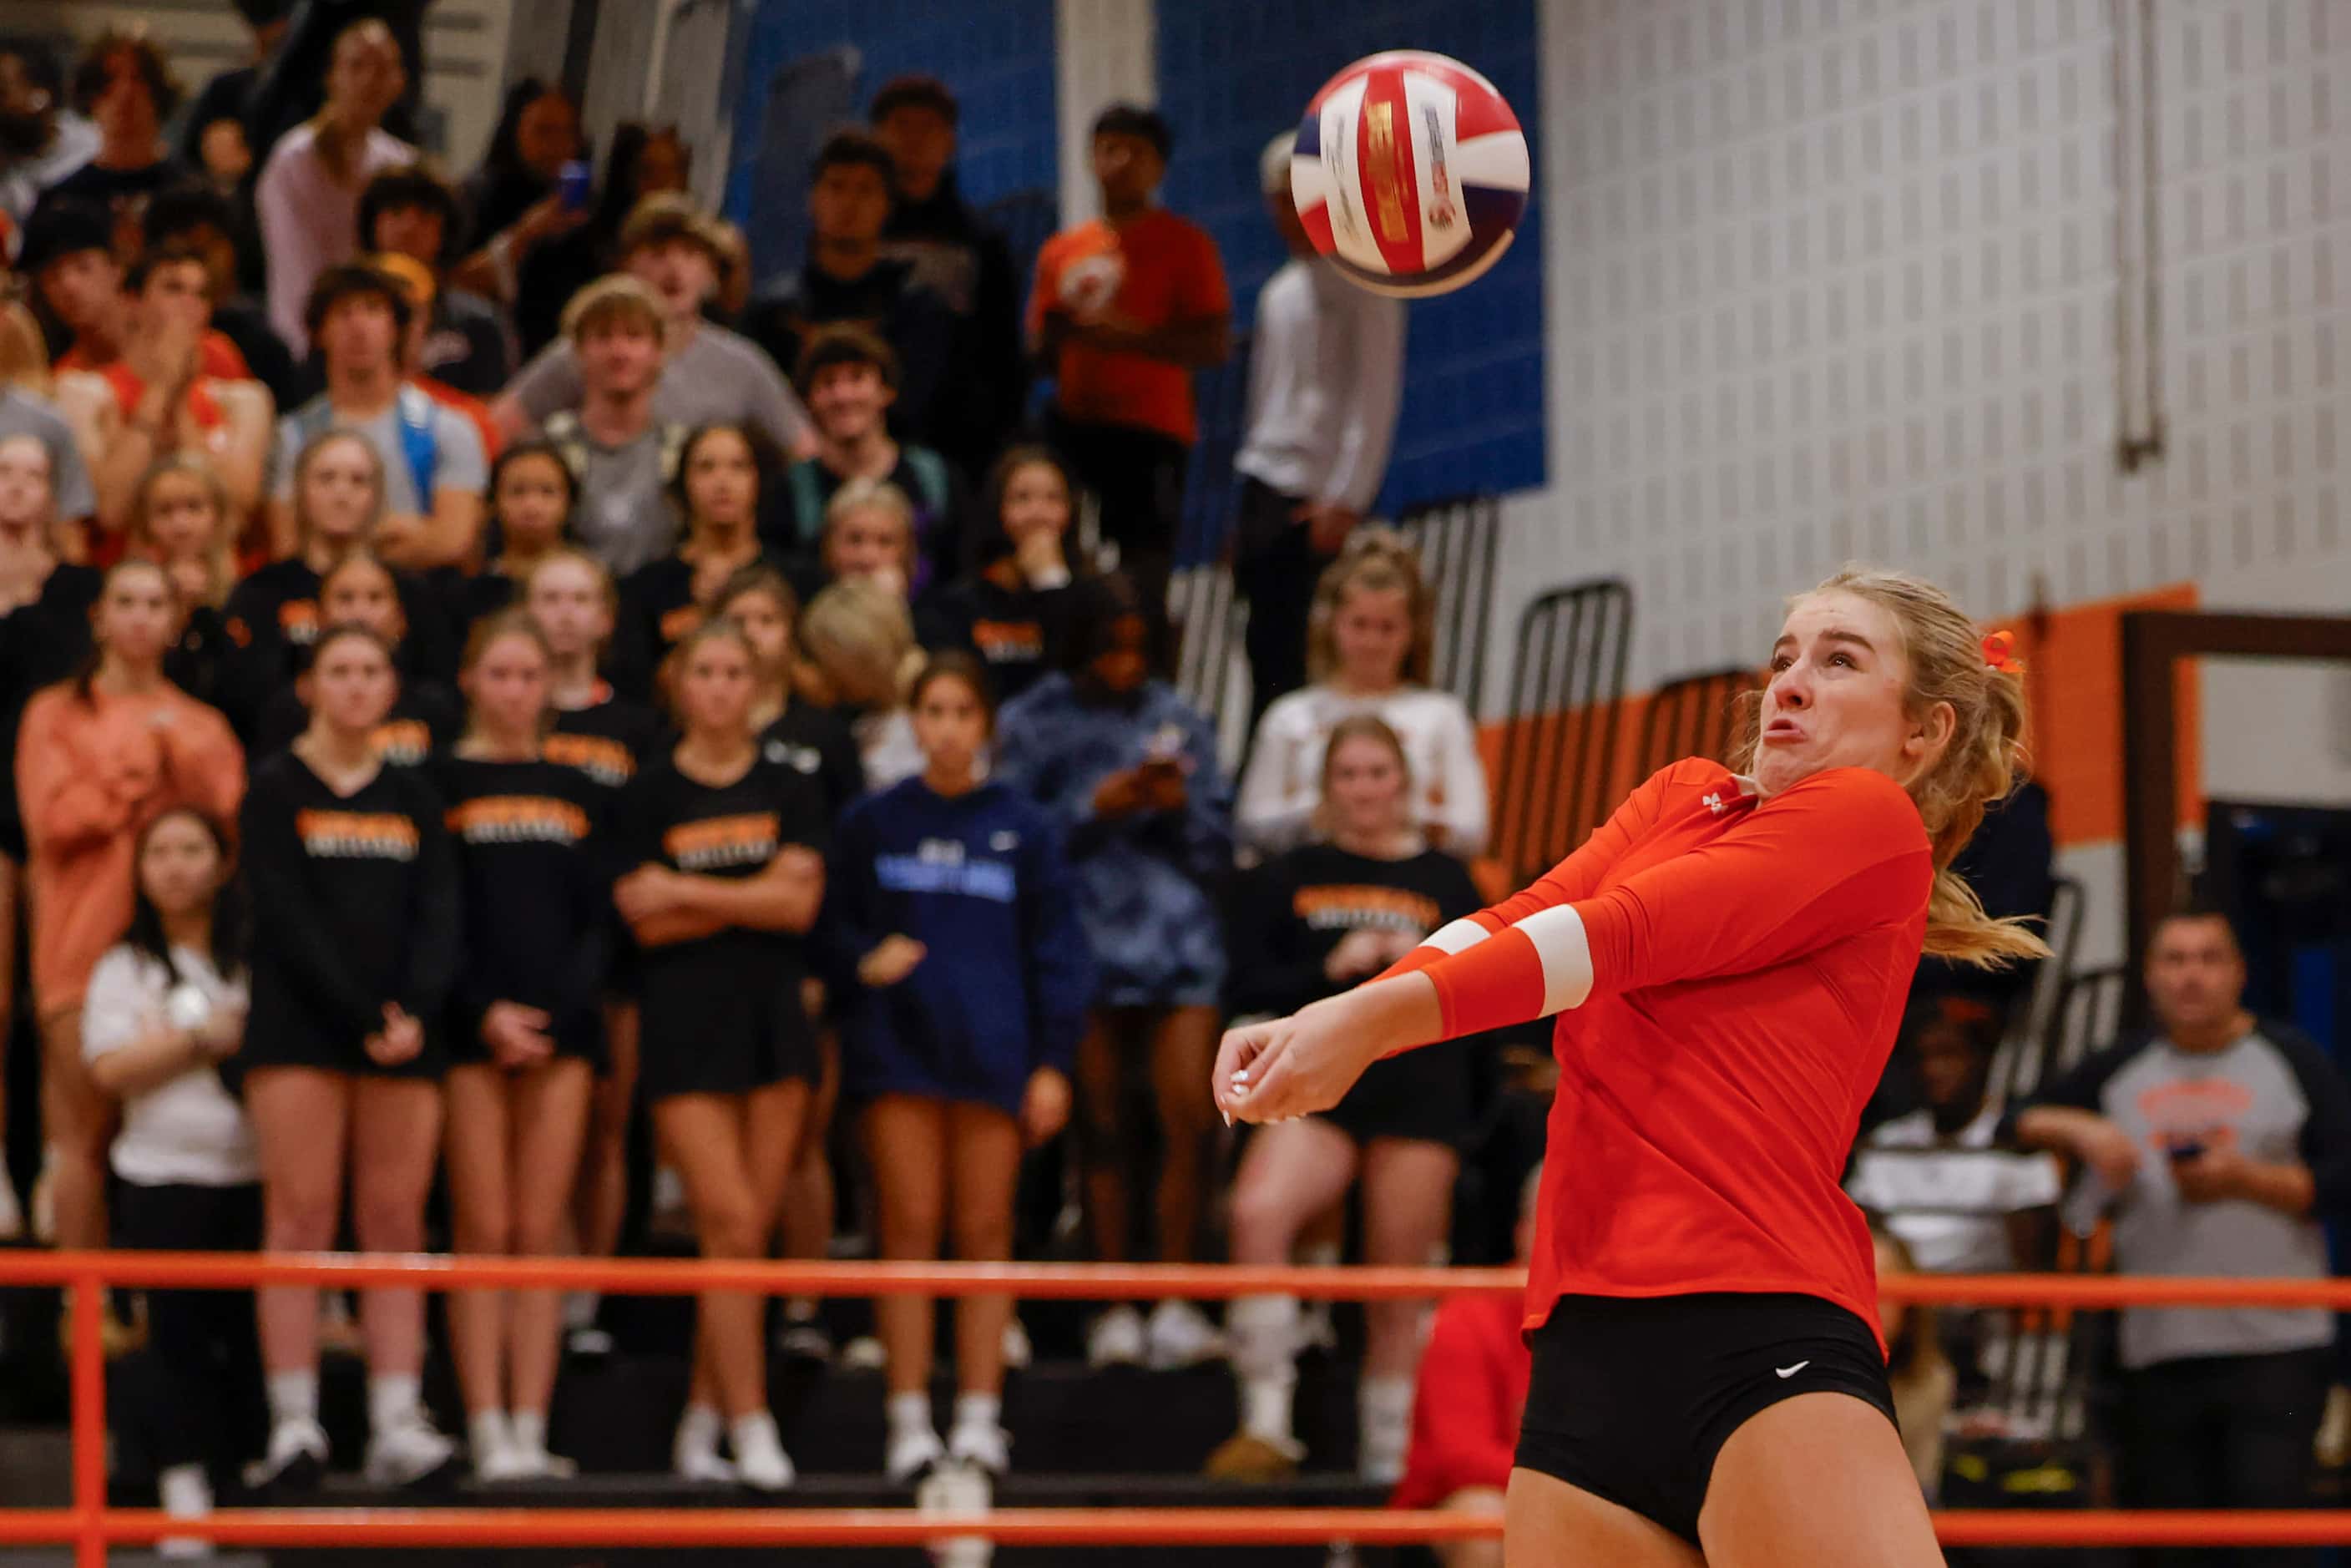 Rockwall high’s Audrey St. Clair digs the ball against Rockwall heath during a volleyball...